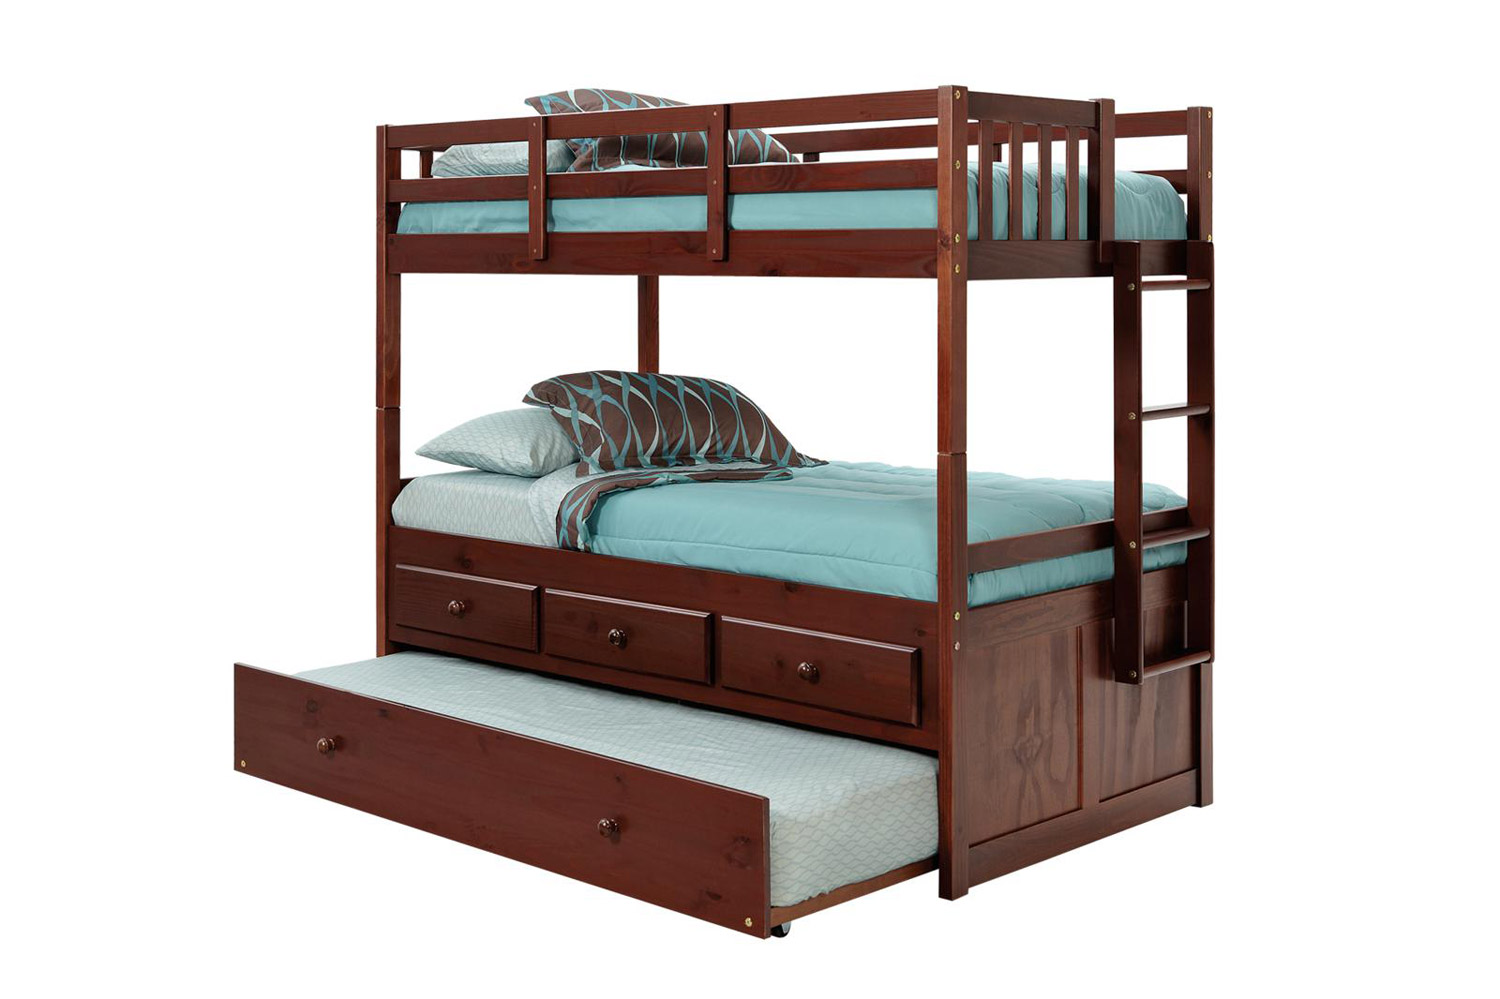 Chelsea Home 3656010 Twin Over Twin Bunk Bed with Trundle and Storage - Dark